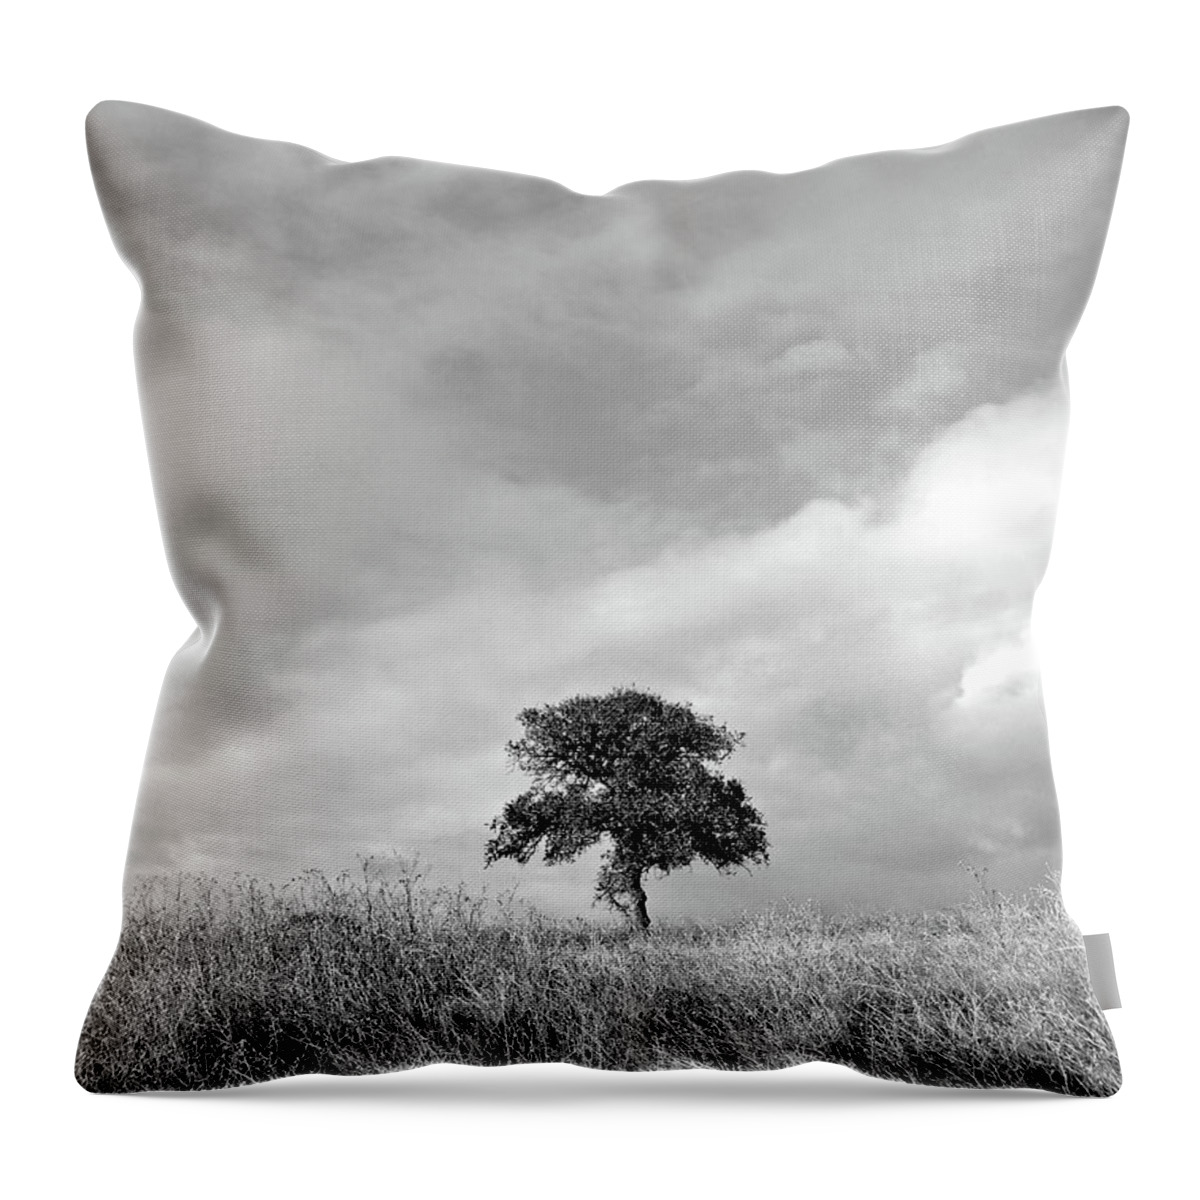 Black And White Throw Pillow featuring the photograph Little Lone Oak Tree by Pamela Patch